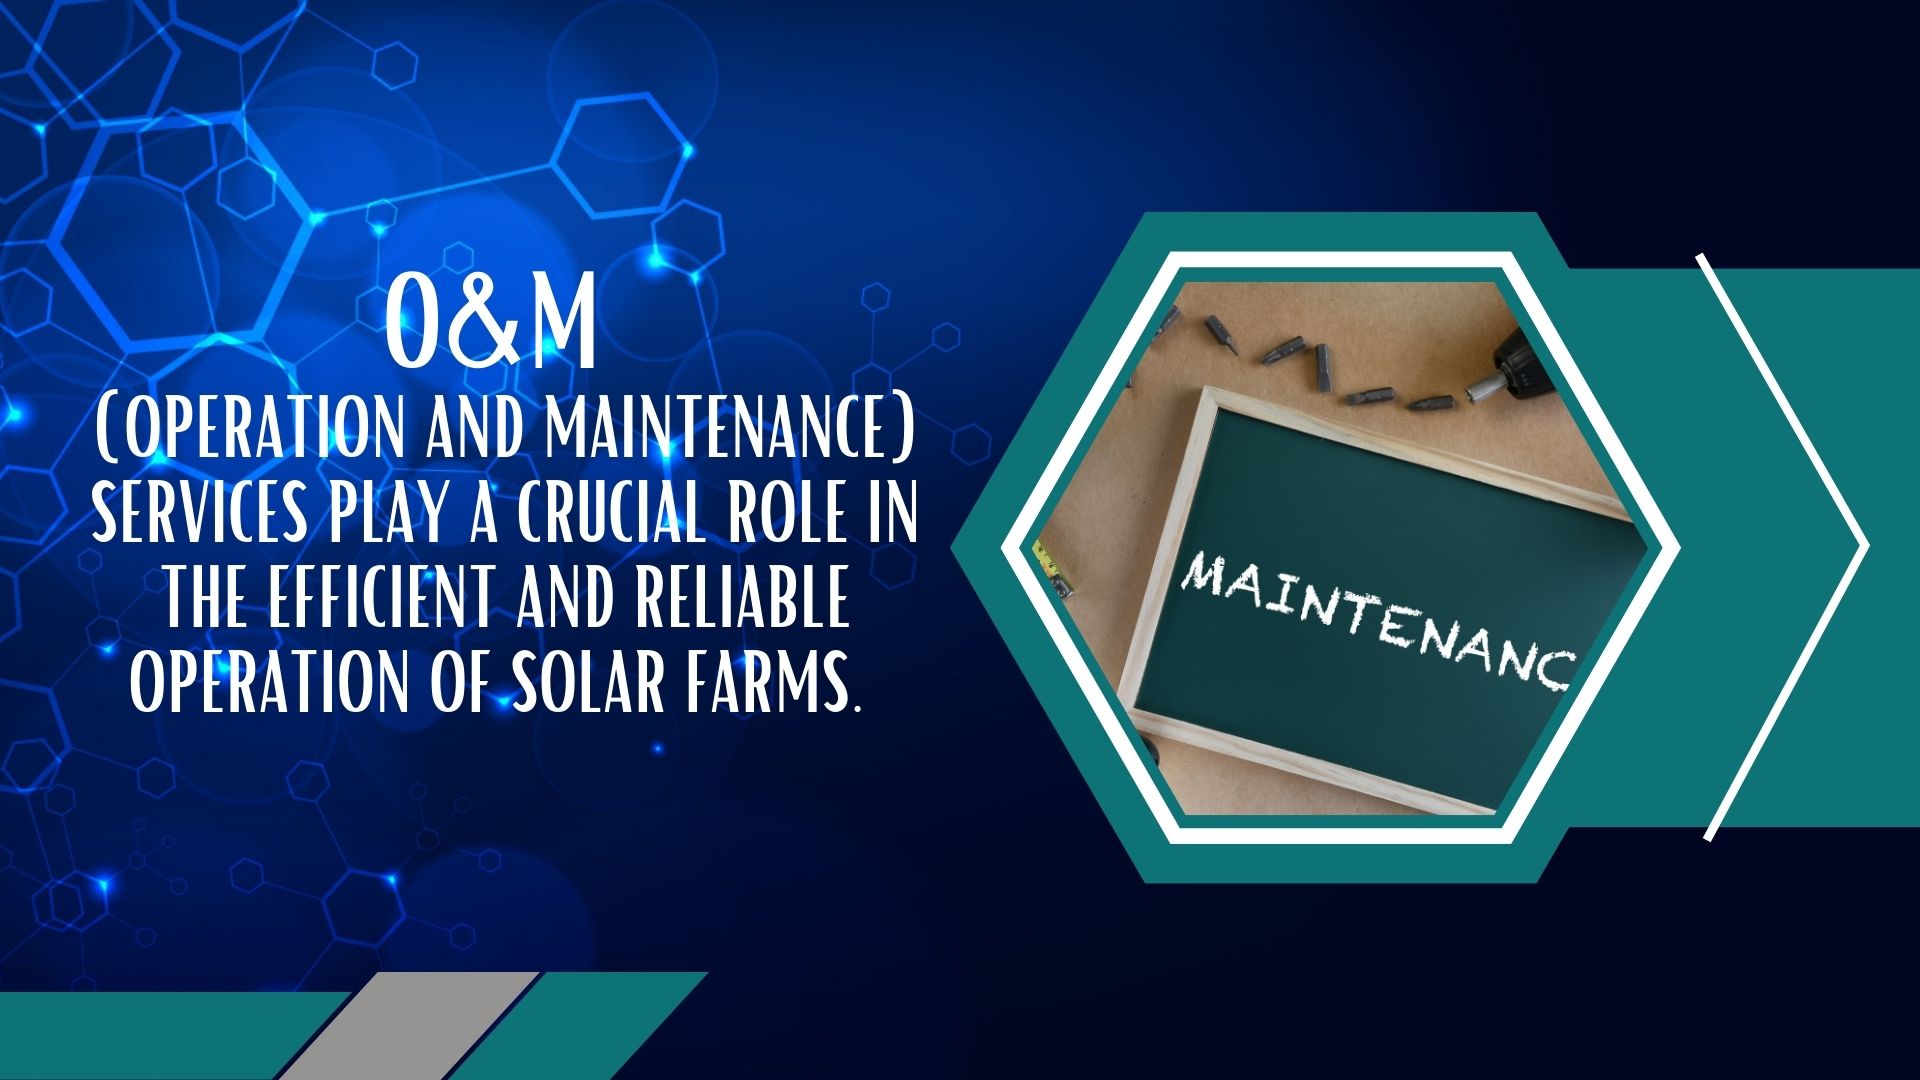 Operation and Maintenance for solar farms